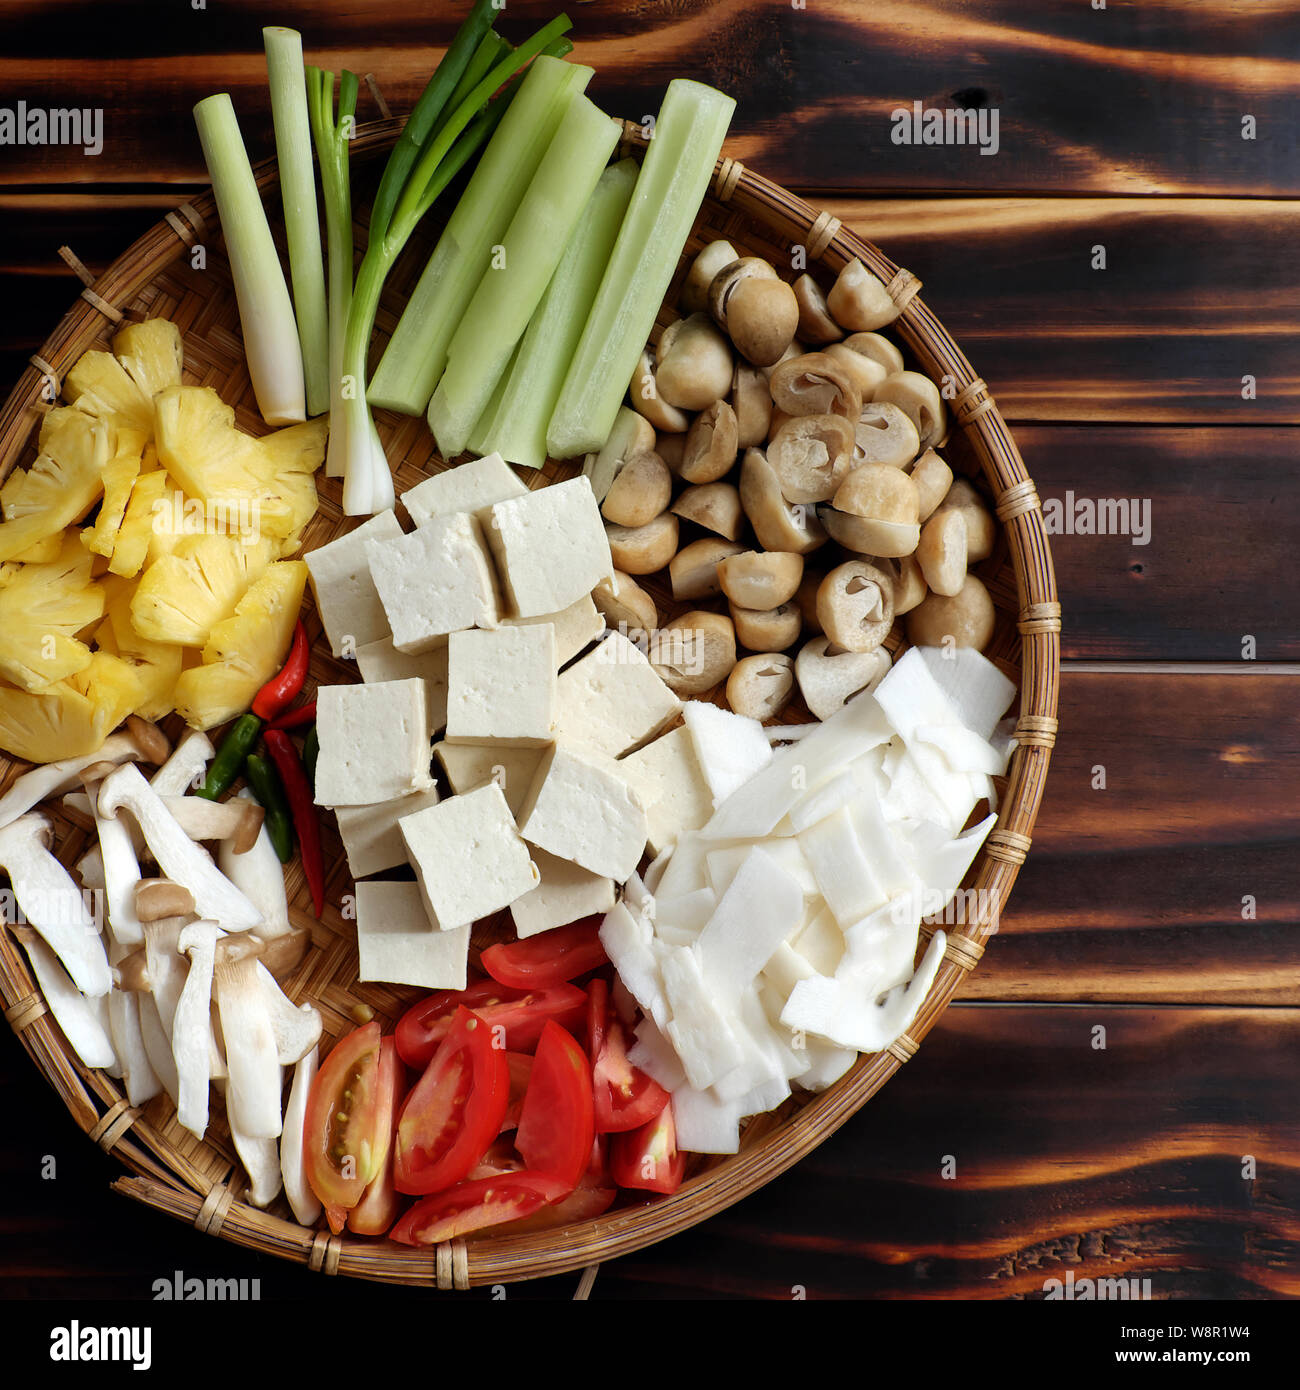 Top view food processing for vegetarian meal, vegetables soup from raw ingredients as tomato, pineapple, bamboo shoot and tofu, mushroom, simple dish Stock Photo